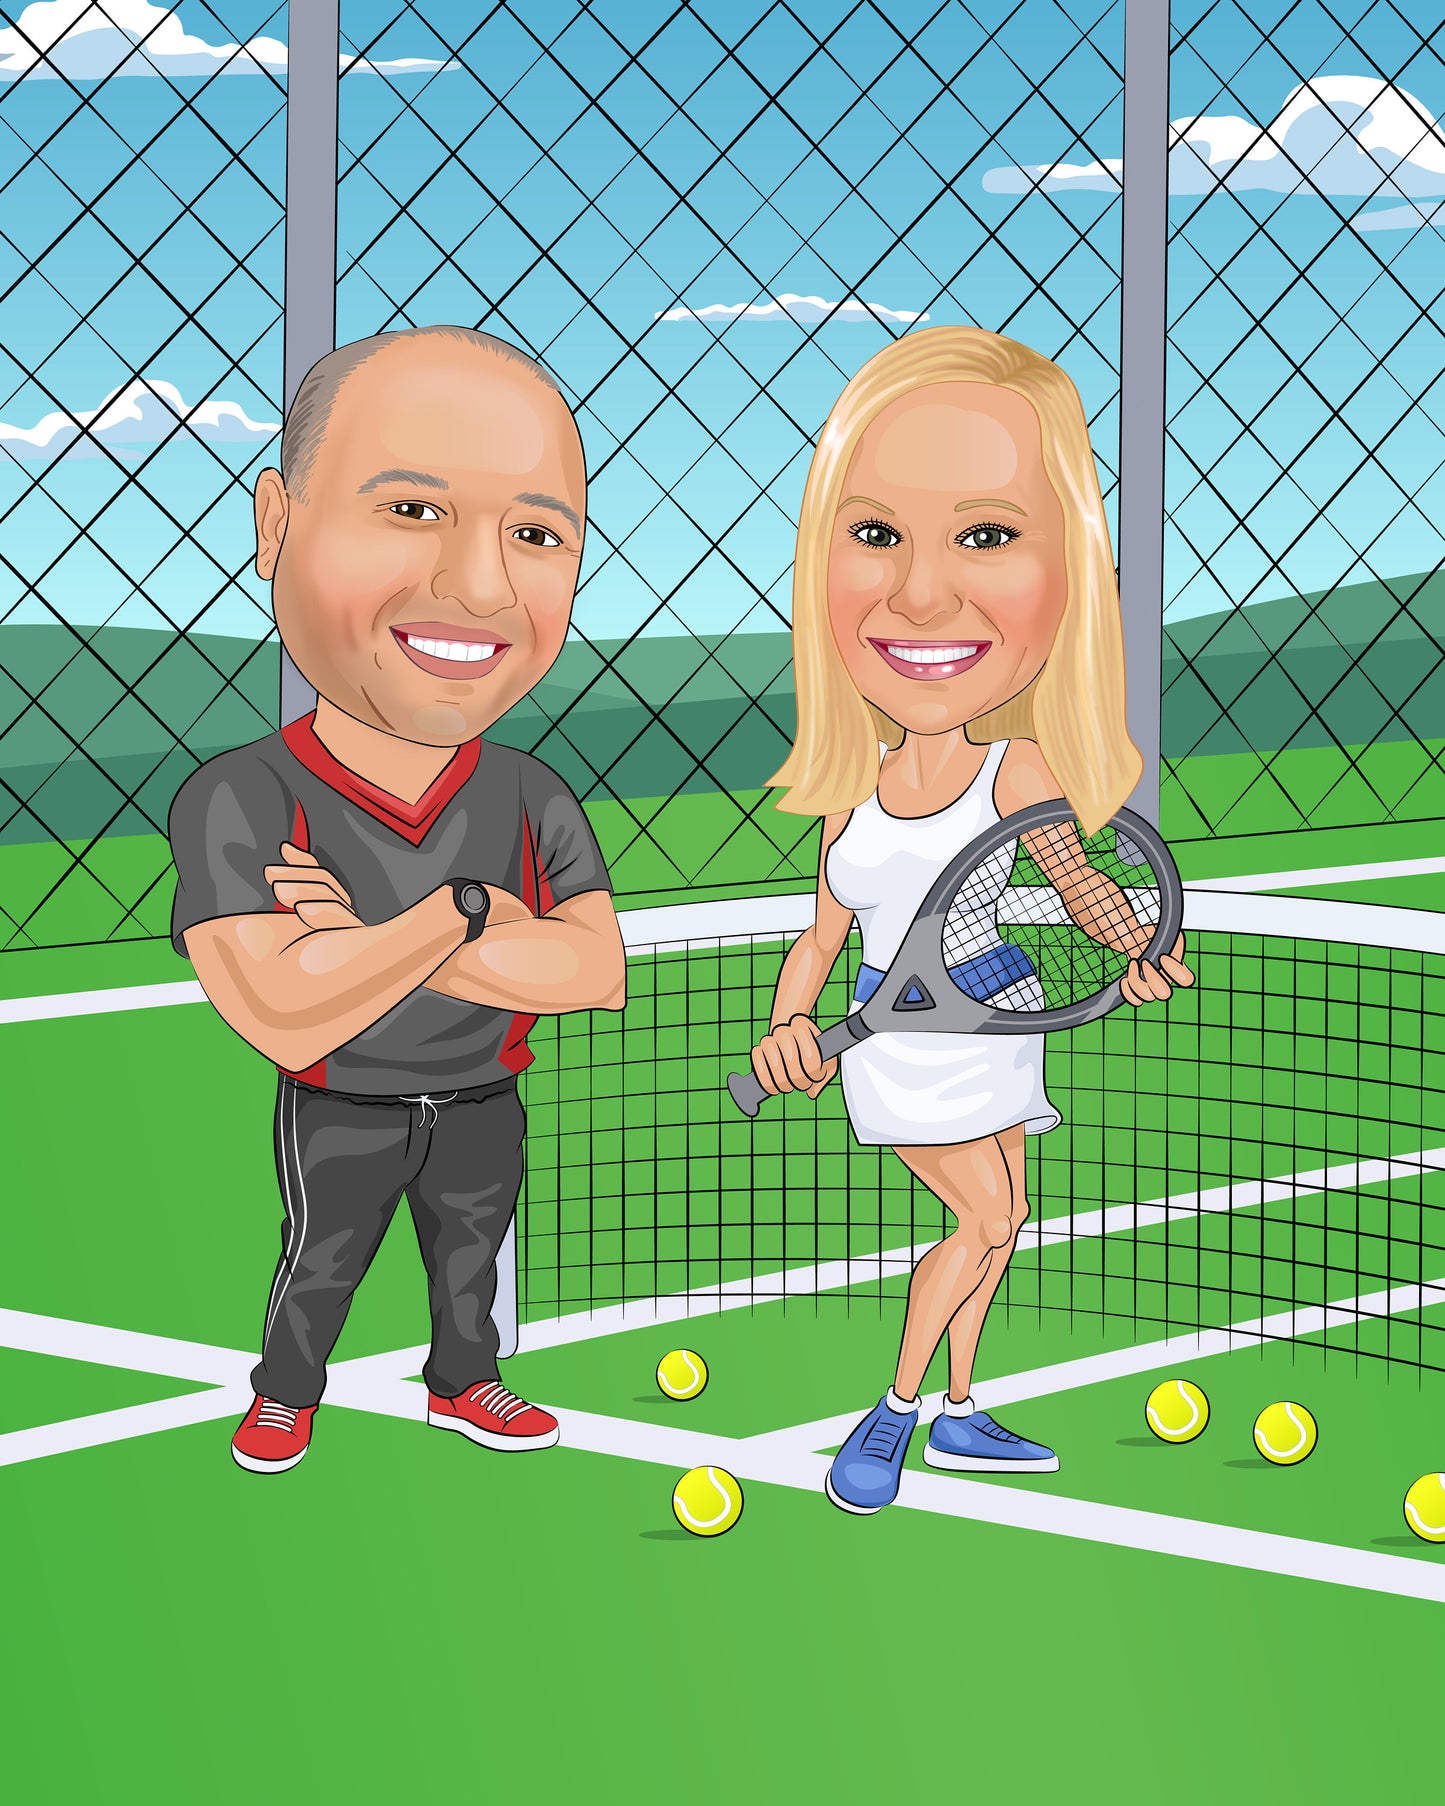 Tennis Player Gift - Custom Caricature Portrait From Your Photo/tennis coach gift